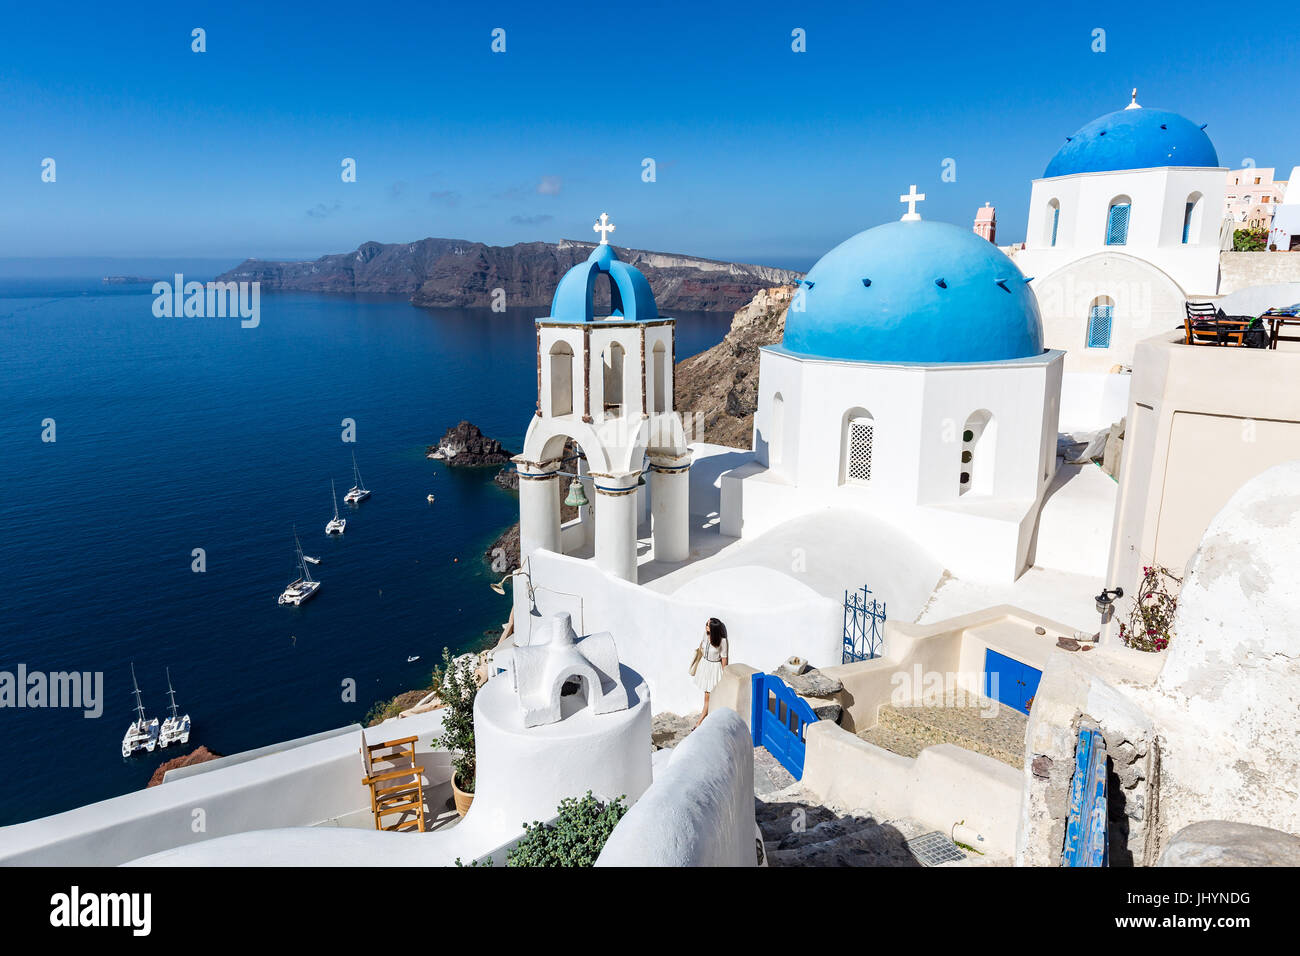 White washed stone buildings and the blue cupolas of a church in Oia, Santorini, Cyclades, Greek Islands, Greece, Europe Stock Photo